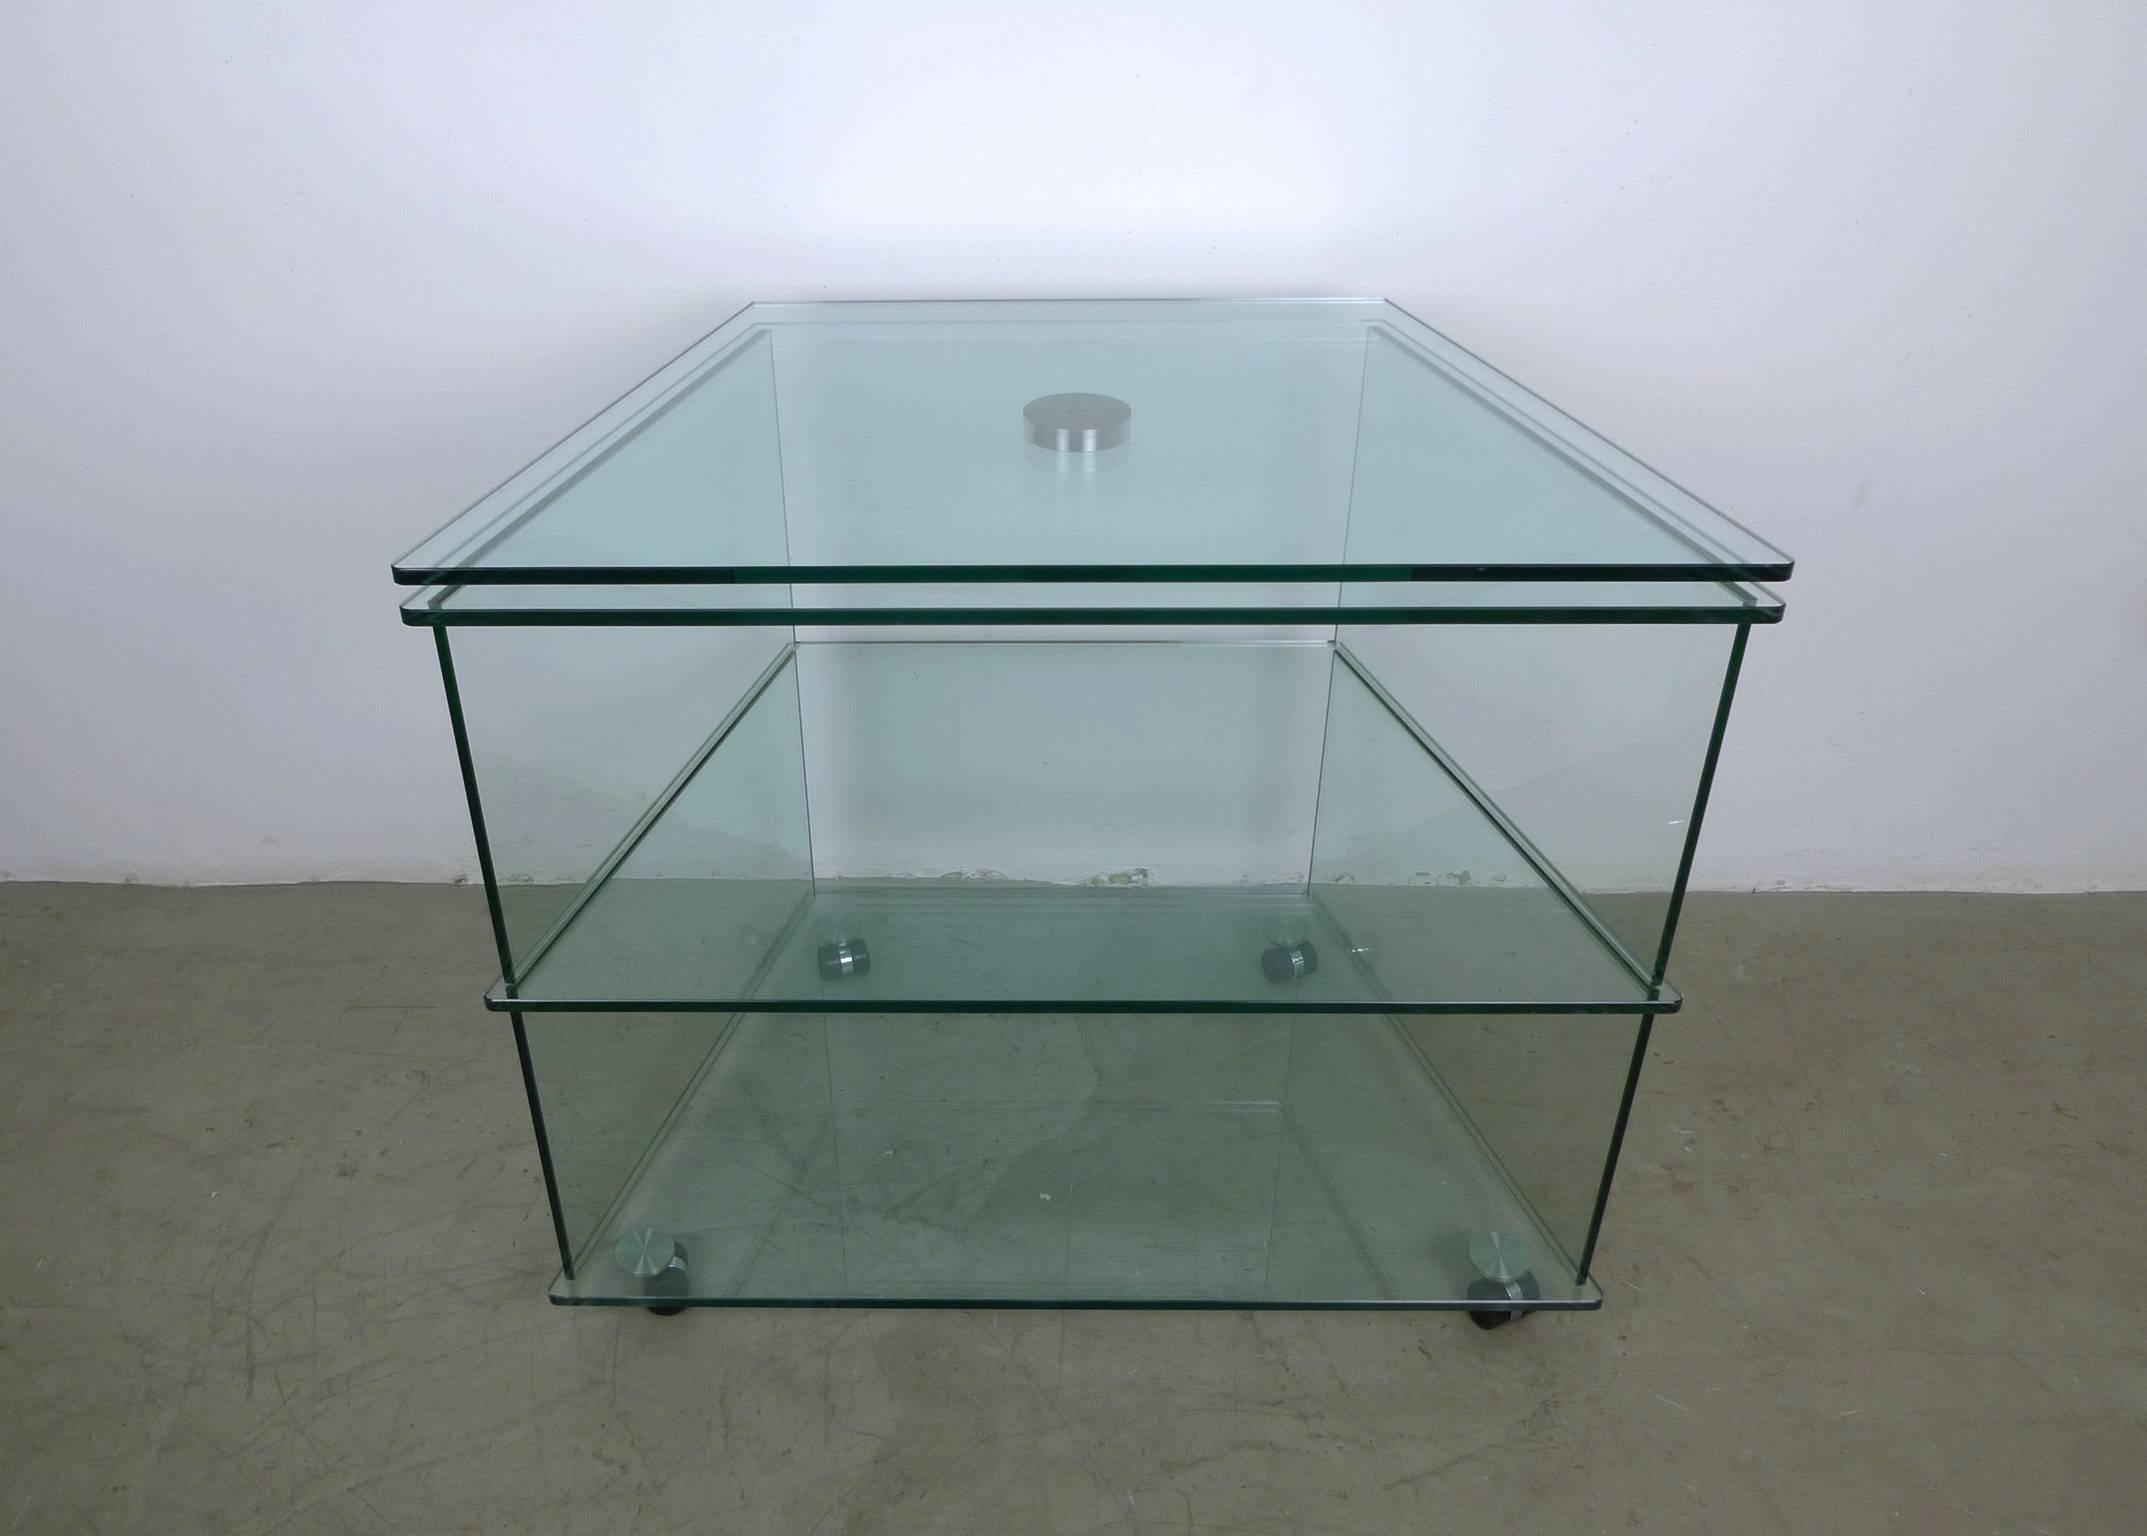 Glass TV stand on wheels, Germany, 1970s. This large TV stand is made of glass and features a swivel top, two compartments, and rests on four wheels. The trapezoidal frame is wider at the front (85 cm) and tapers back to a width of 55 cm.
The media